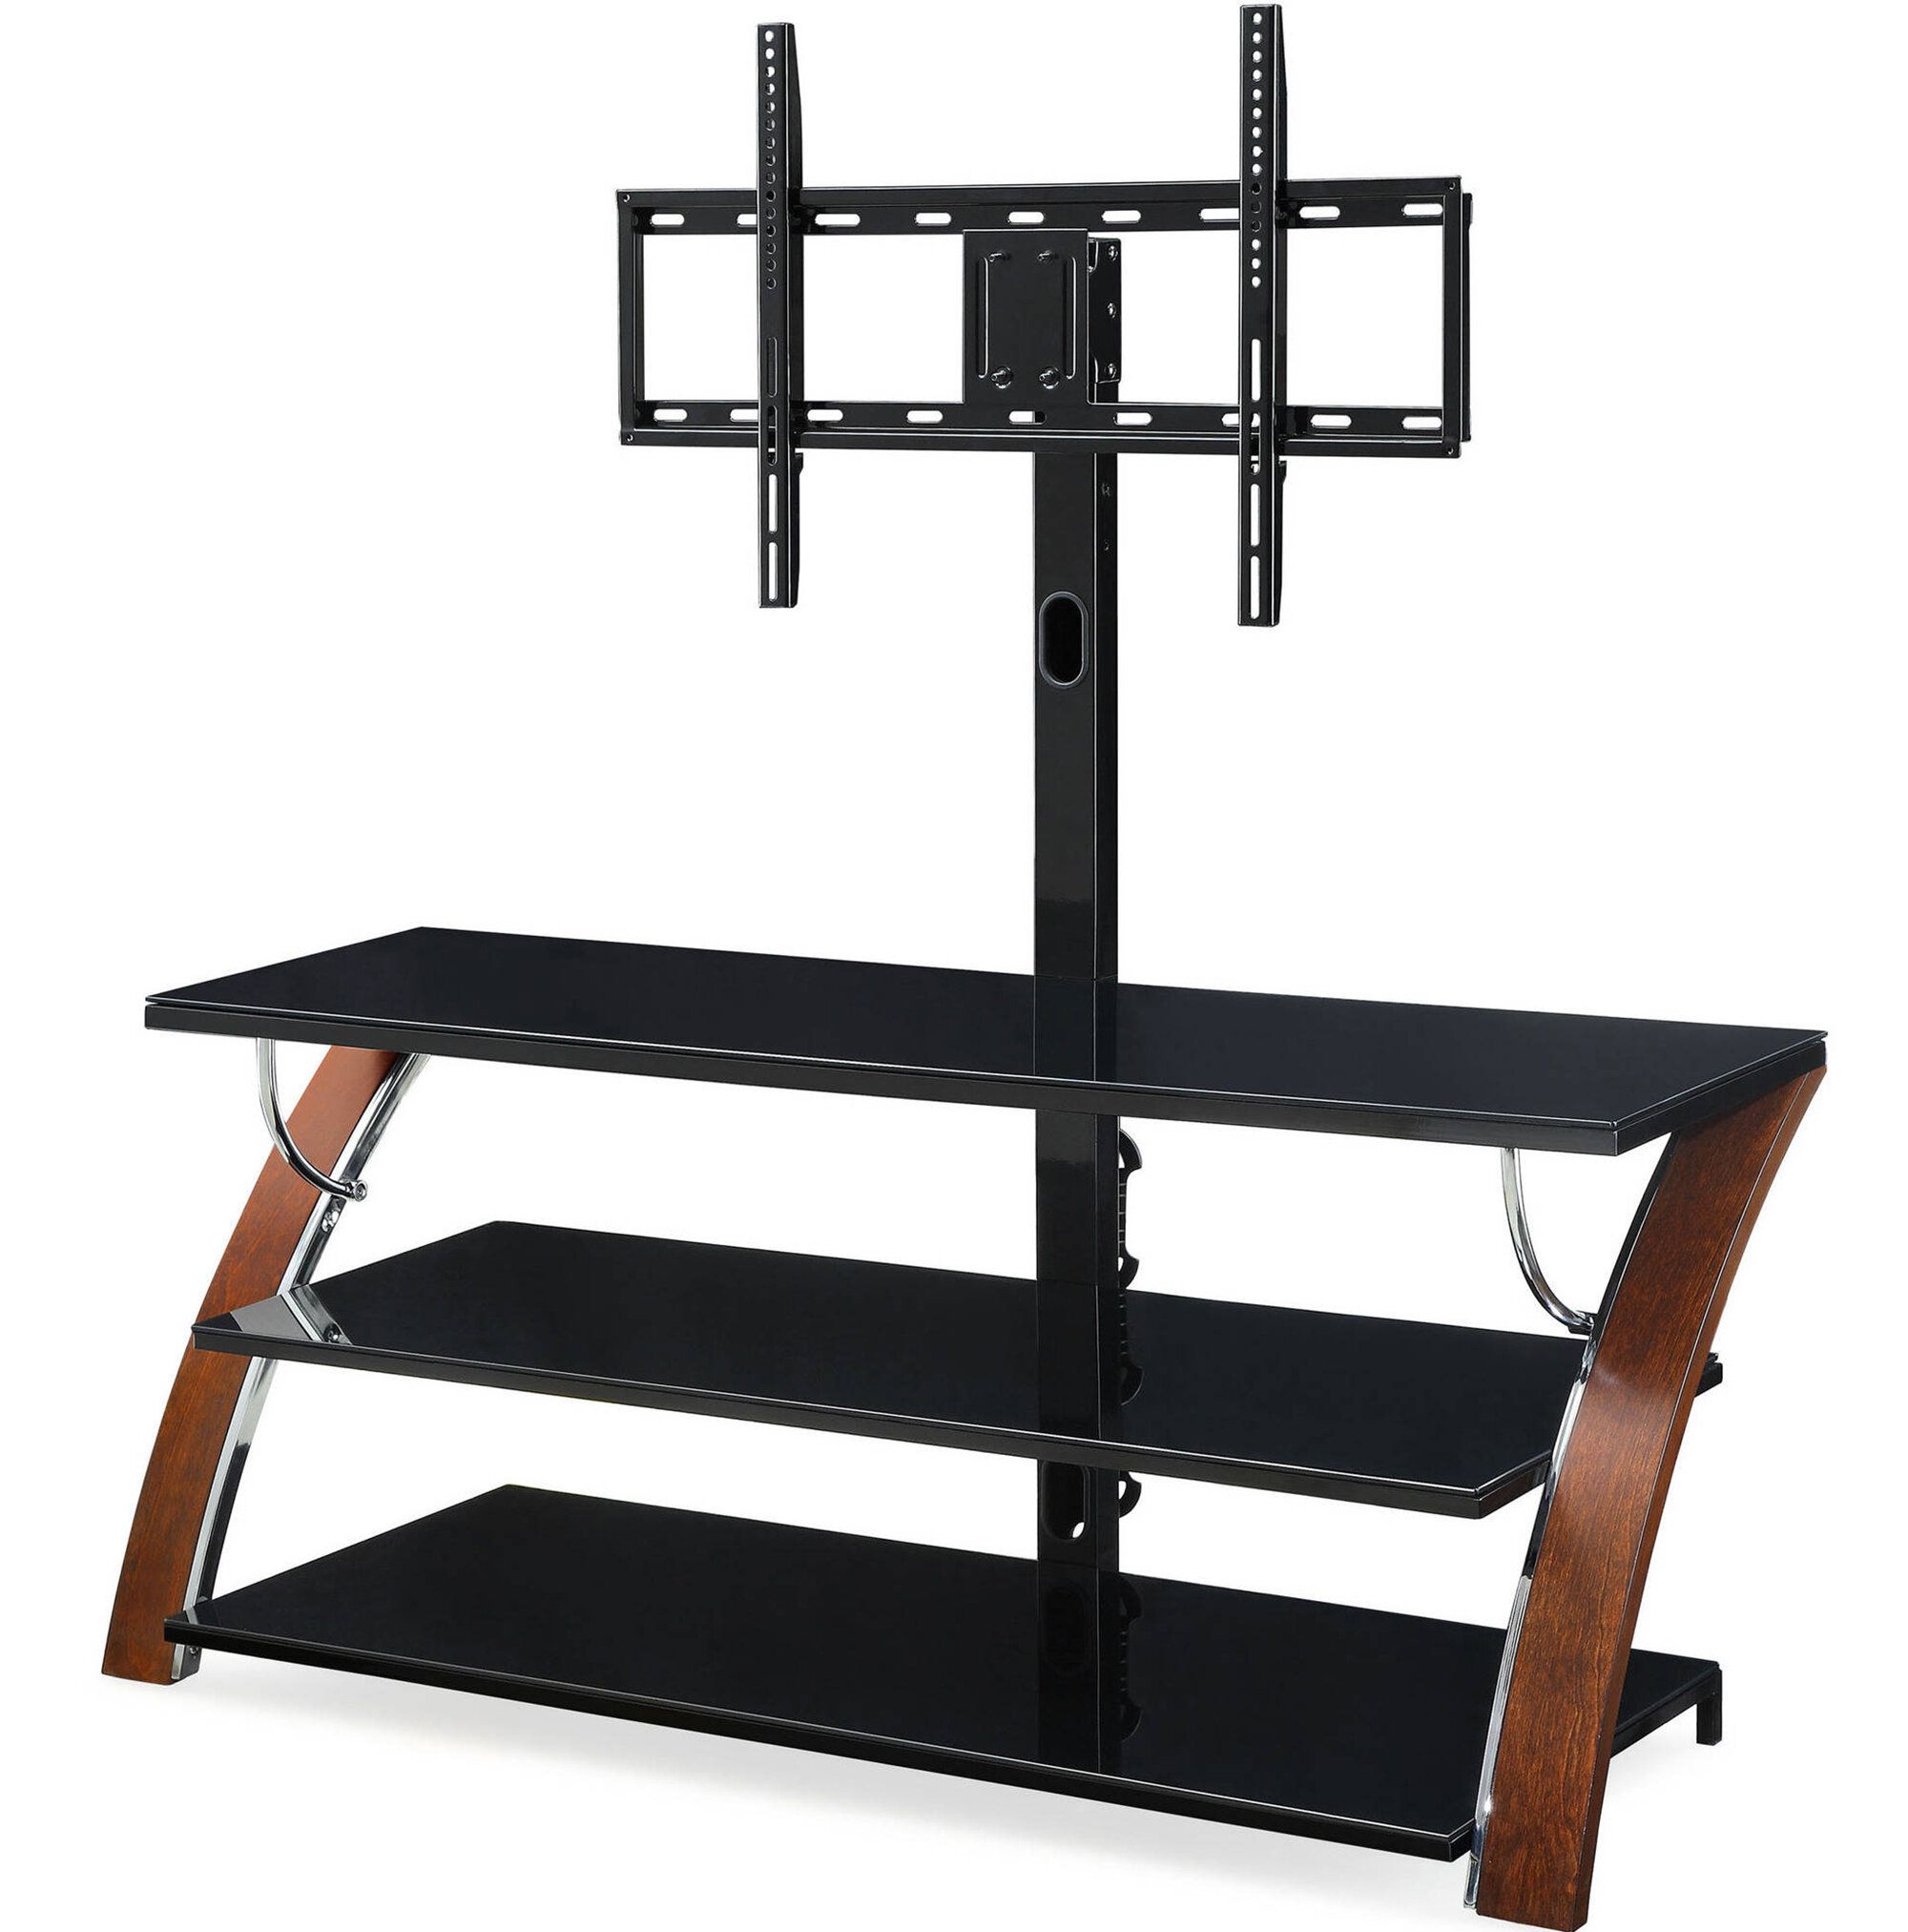 Latitude Run® Urfeta Tv Stand For Tvs Up To 55" & Reviews | Wayfair Pertaining To Glass Shelves Tv Stands (View 5 of 15)